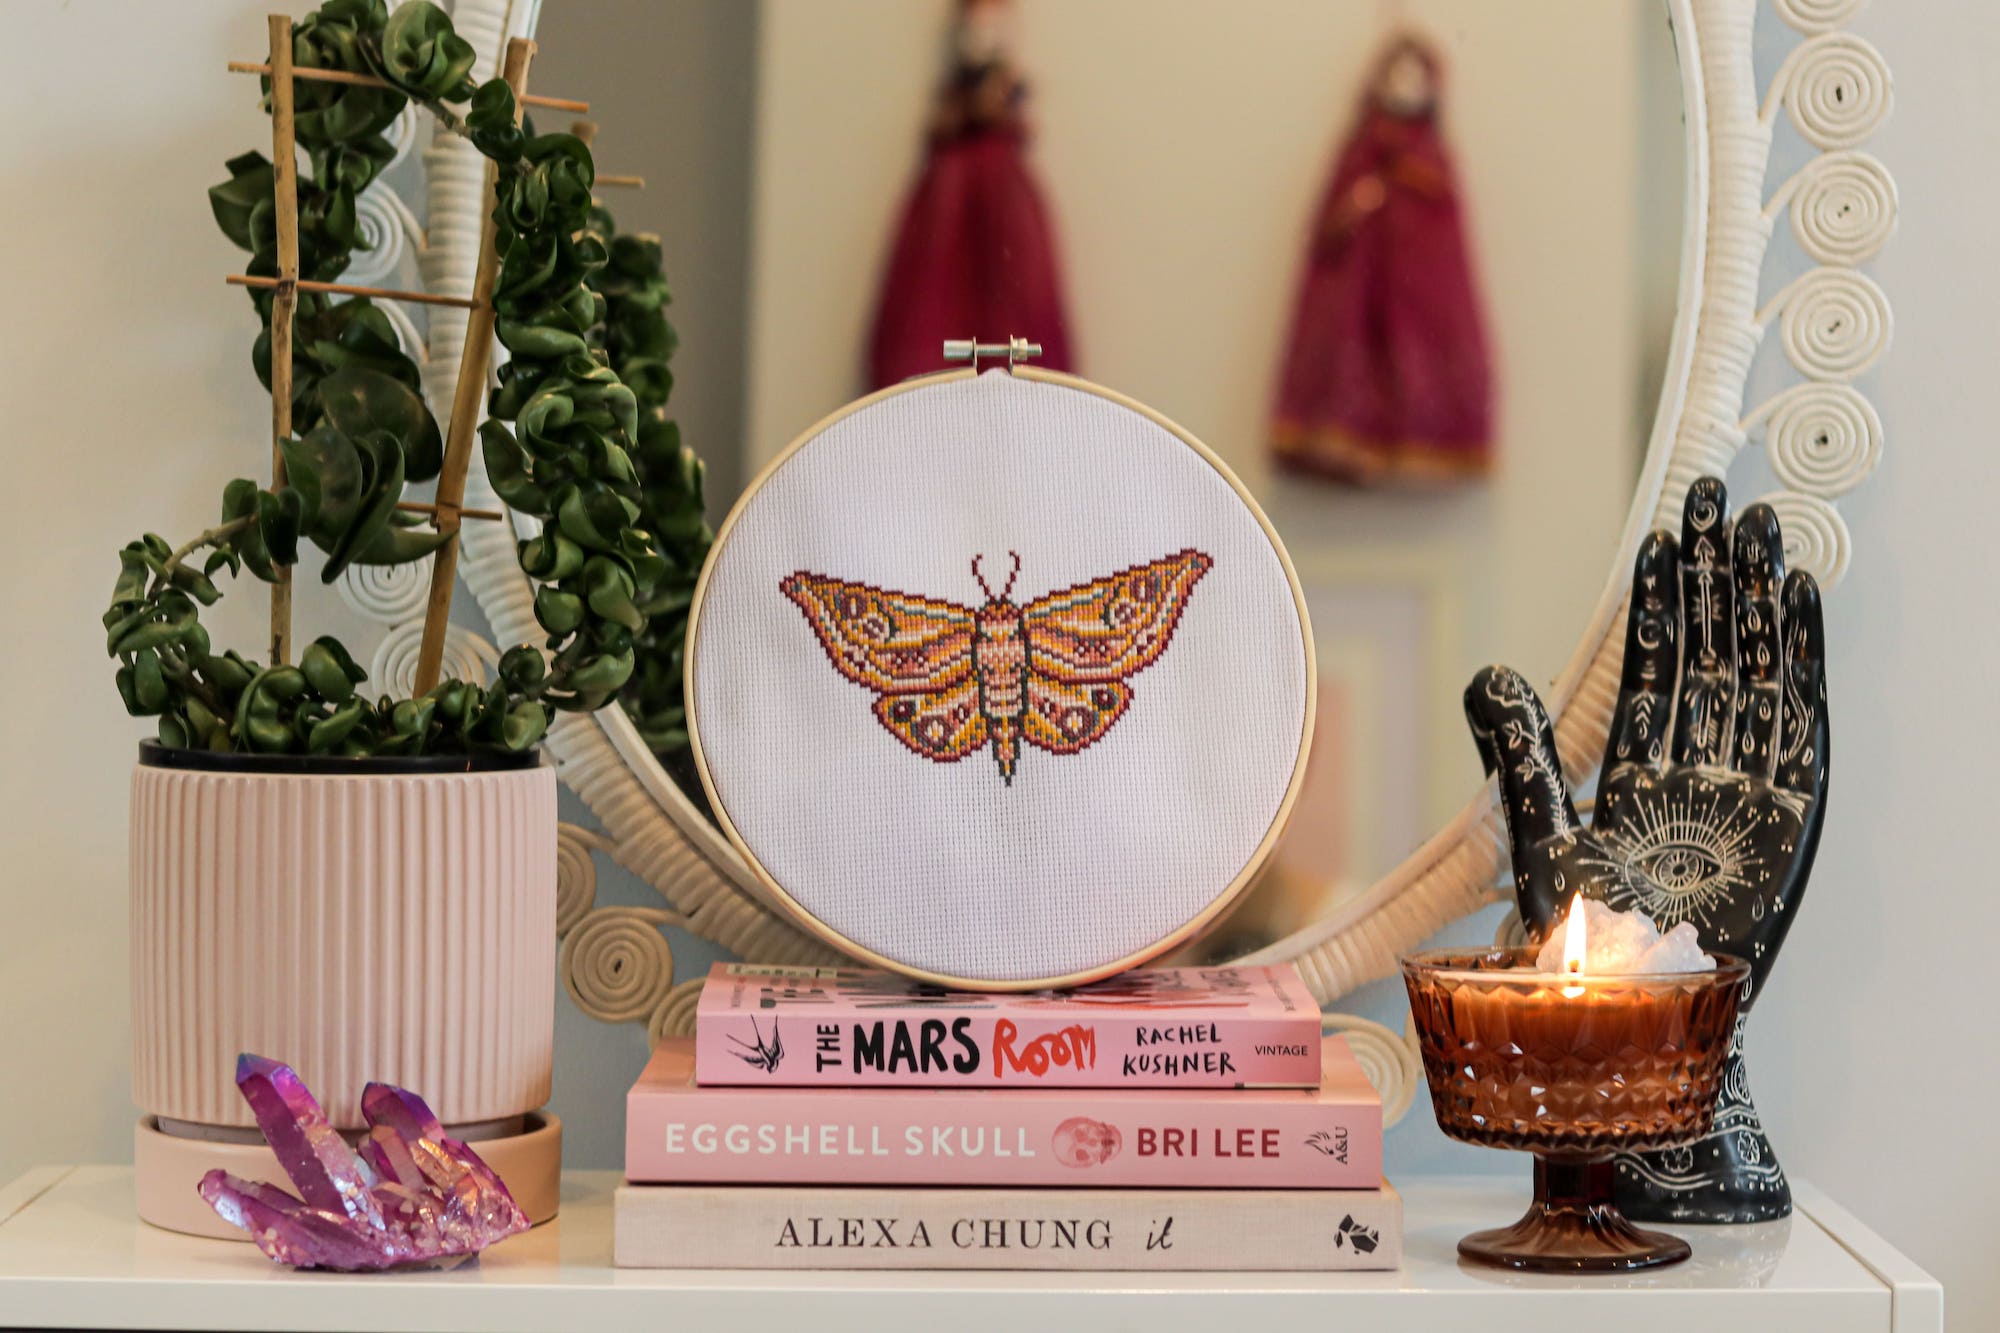 Top 5 Cross Stitch Trends for 2021